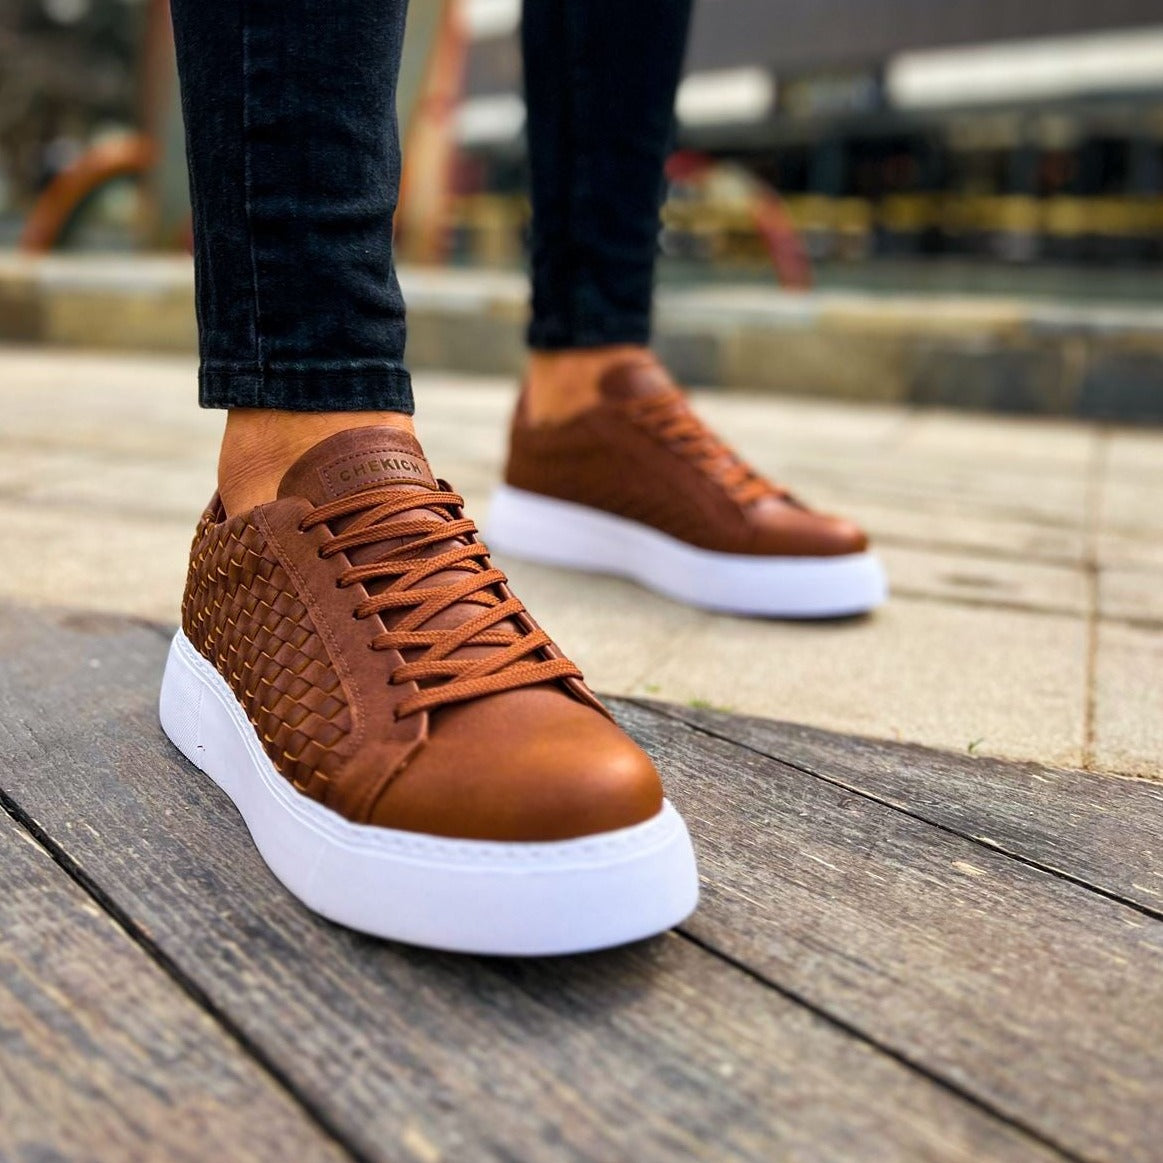 Casual Fashionable Sneakers for Men by Apollo Moda | Luzern Earthy Radiance